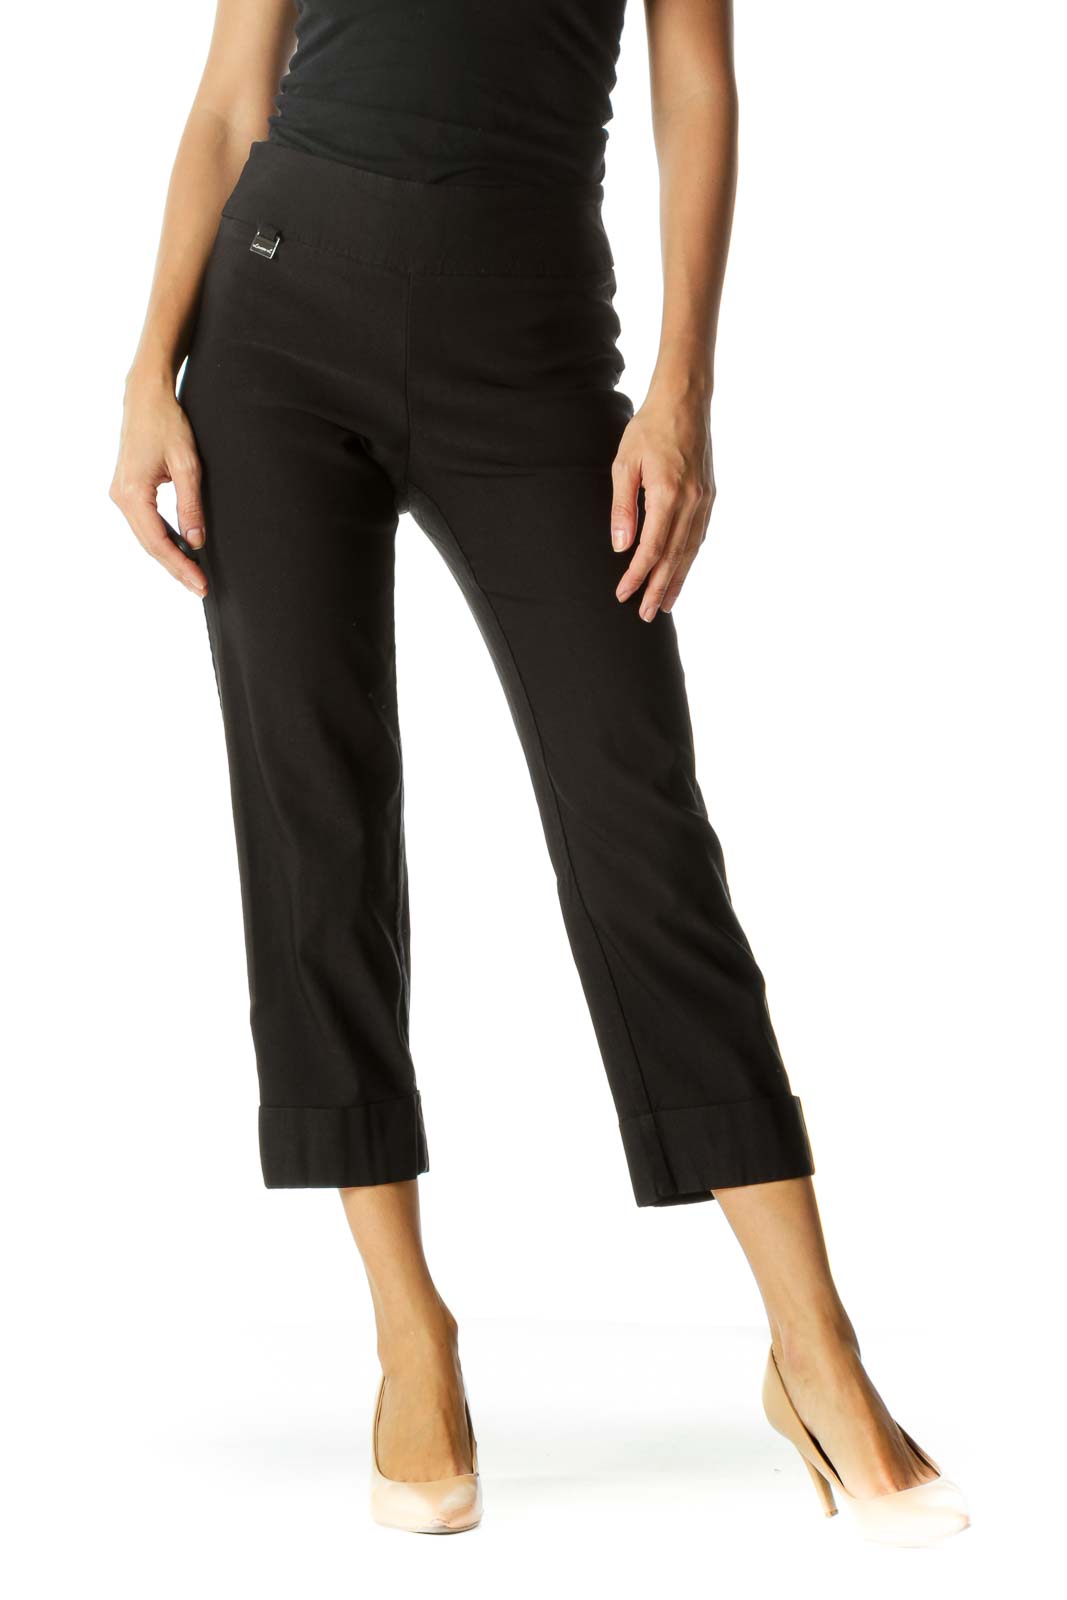 Black Cuffed Cropped Pant Front